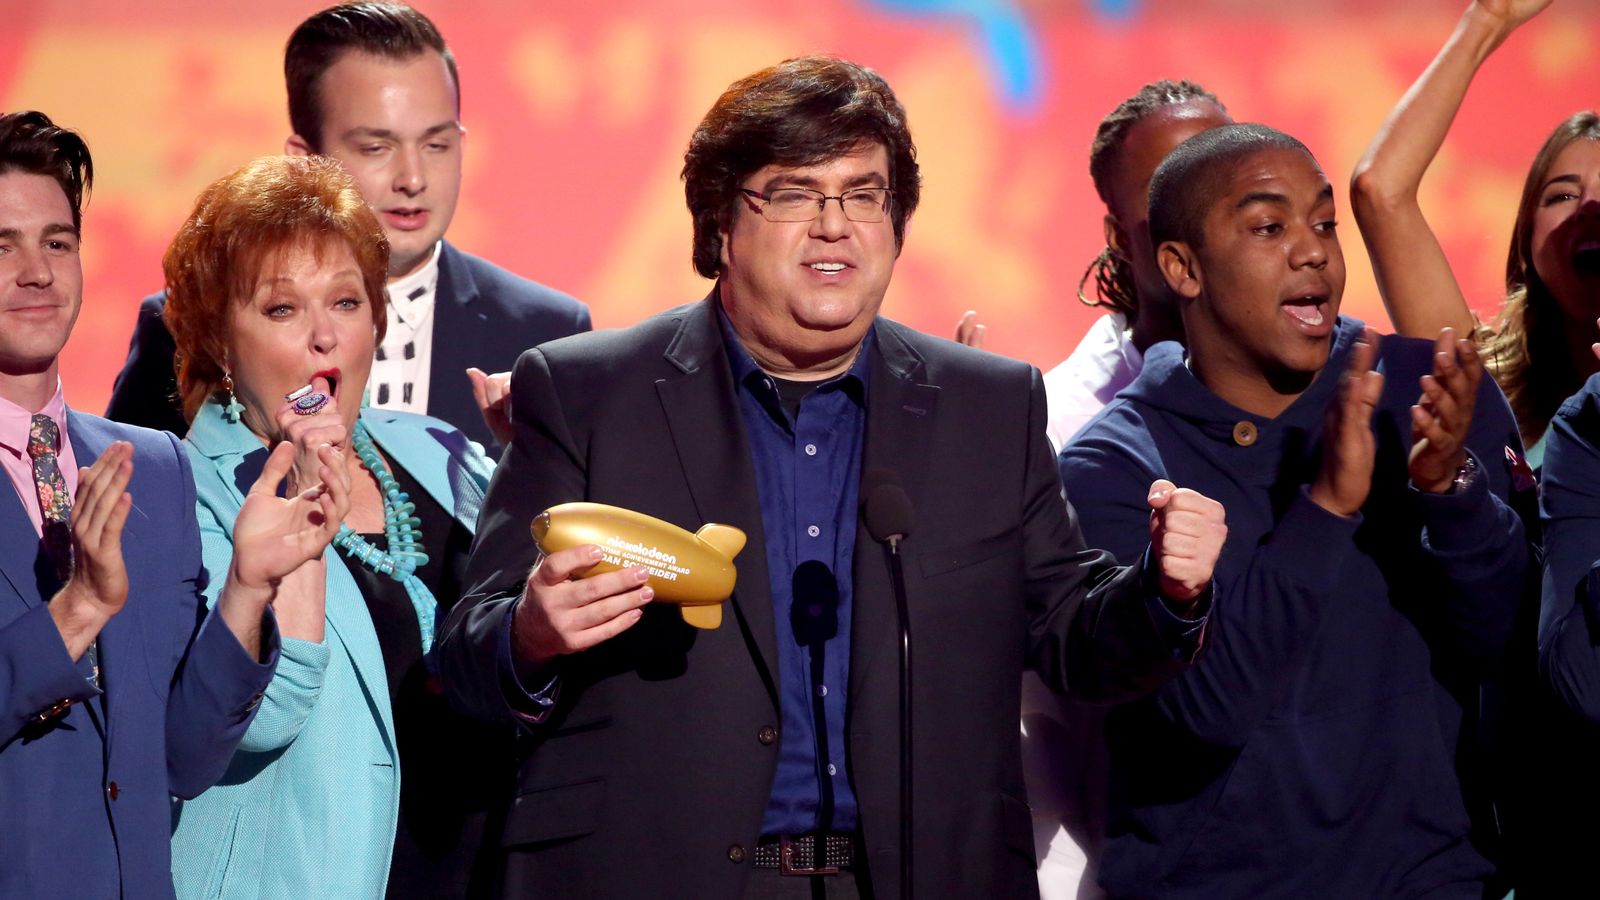 Nickelodeon showrunner Dan Schneider apologises after claims of abuse and inappropriate behaviour